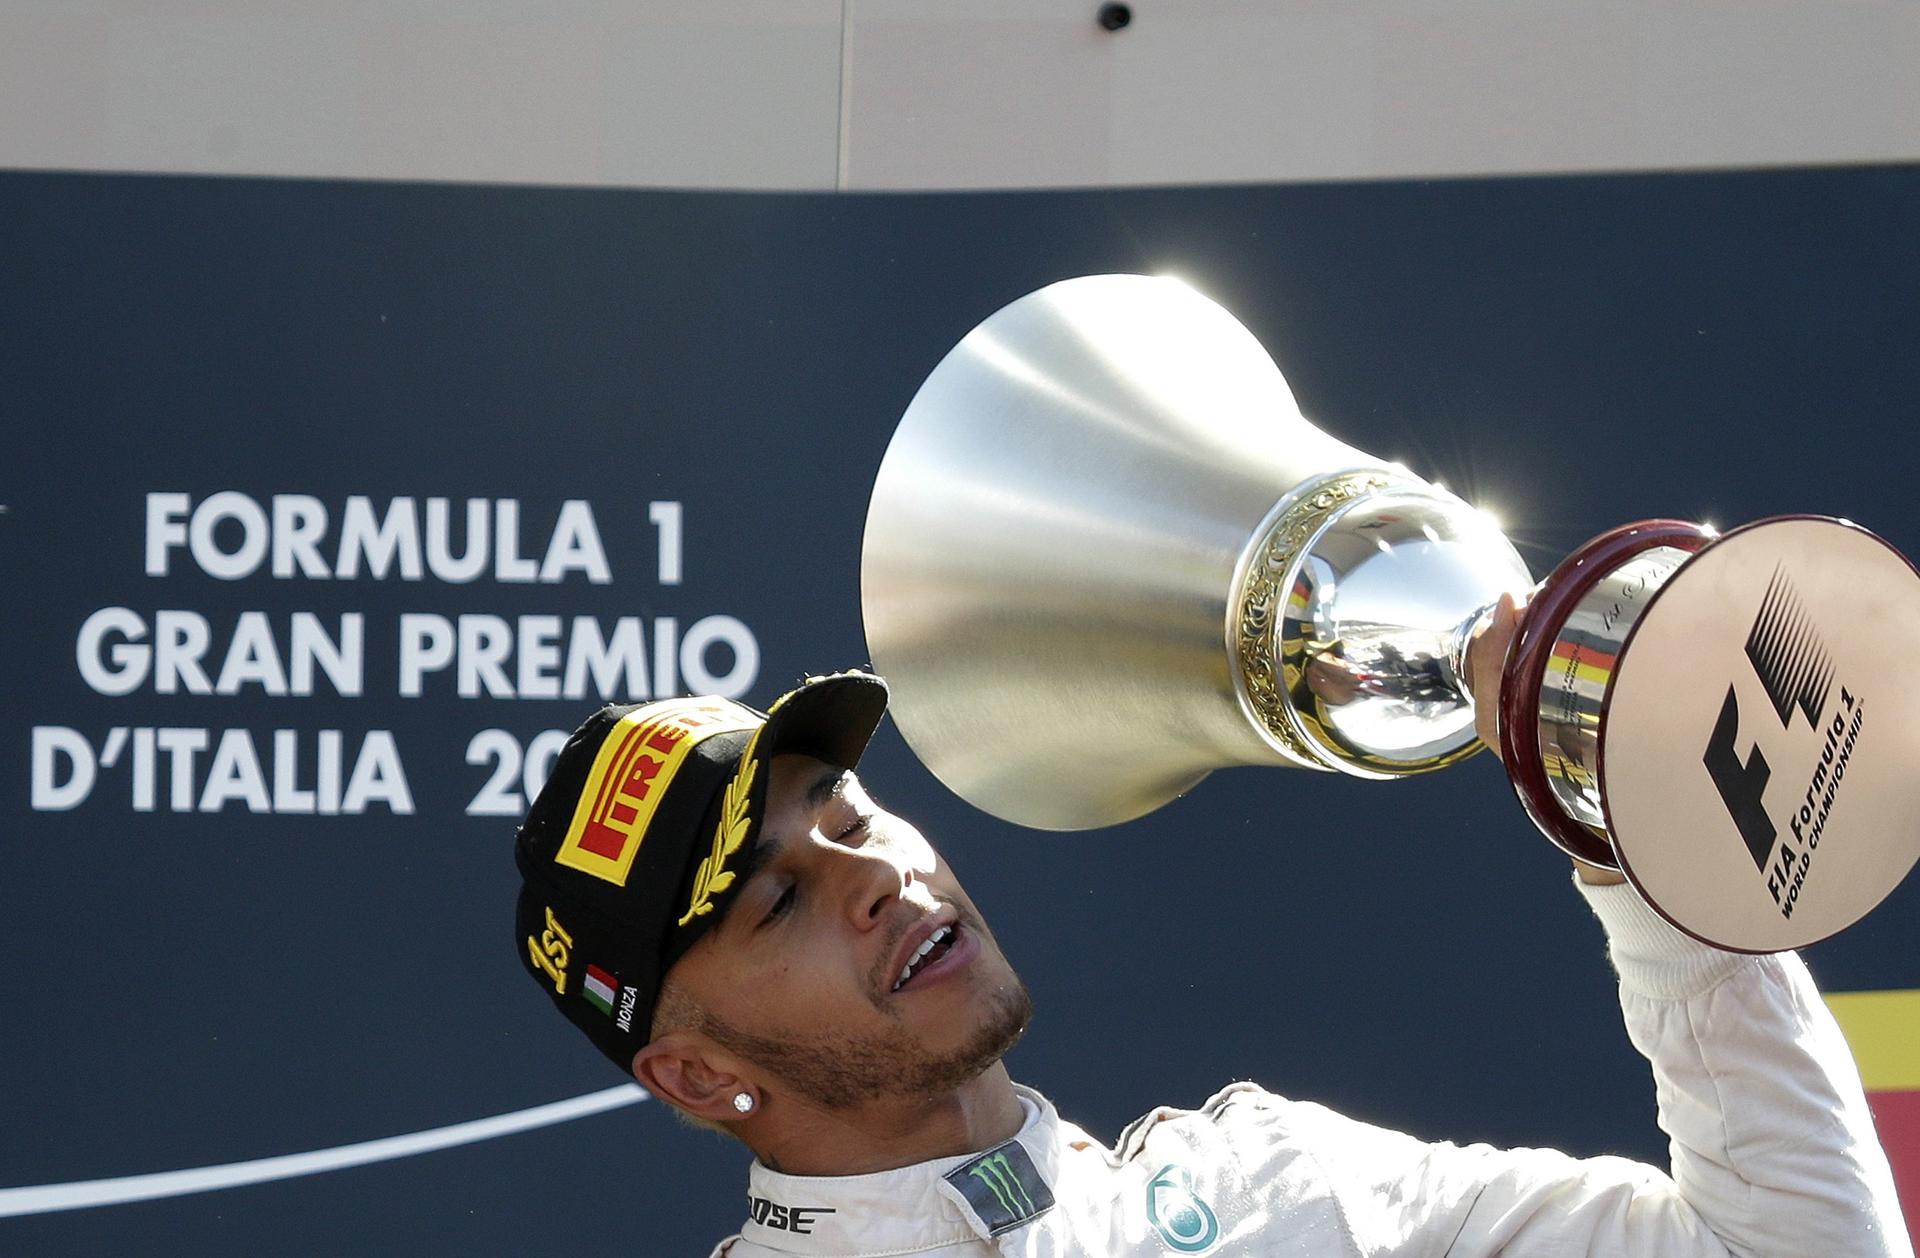 Lewis Hamilton's Monza win confirmed after controversy over tyre